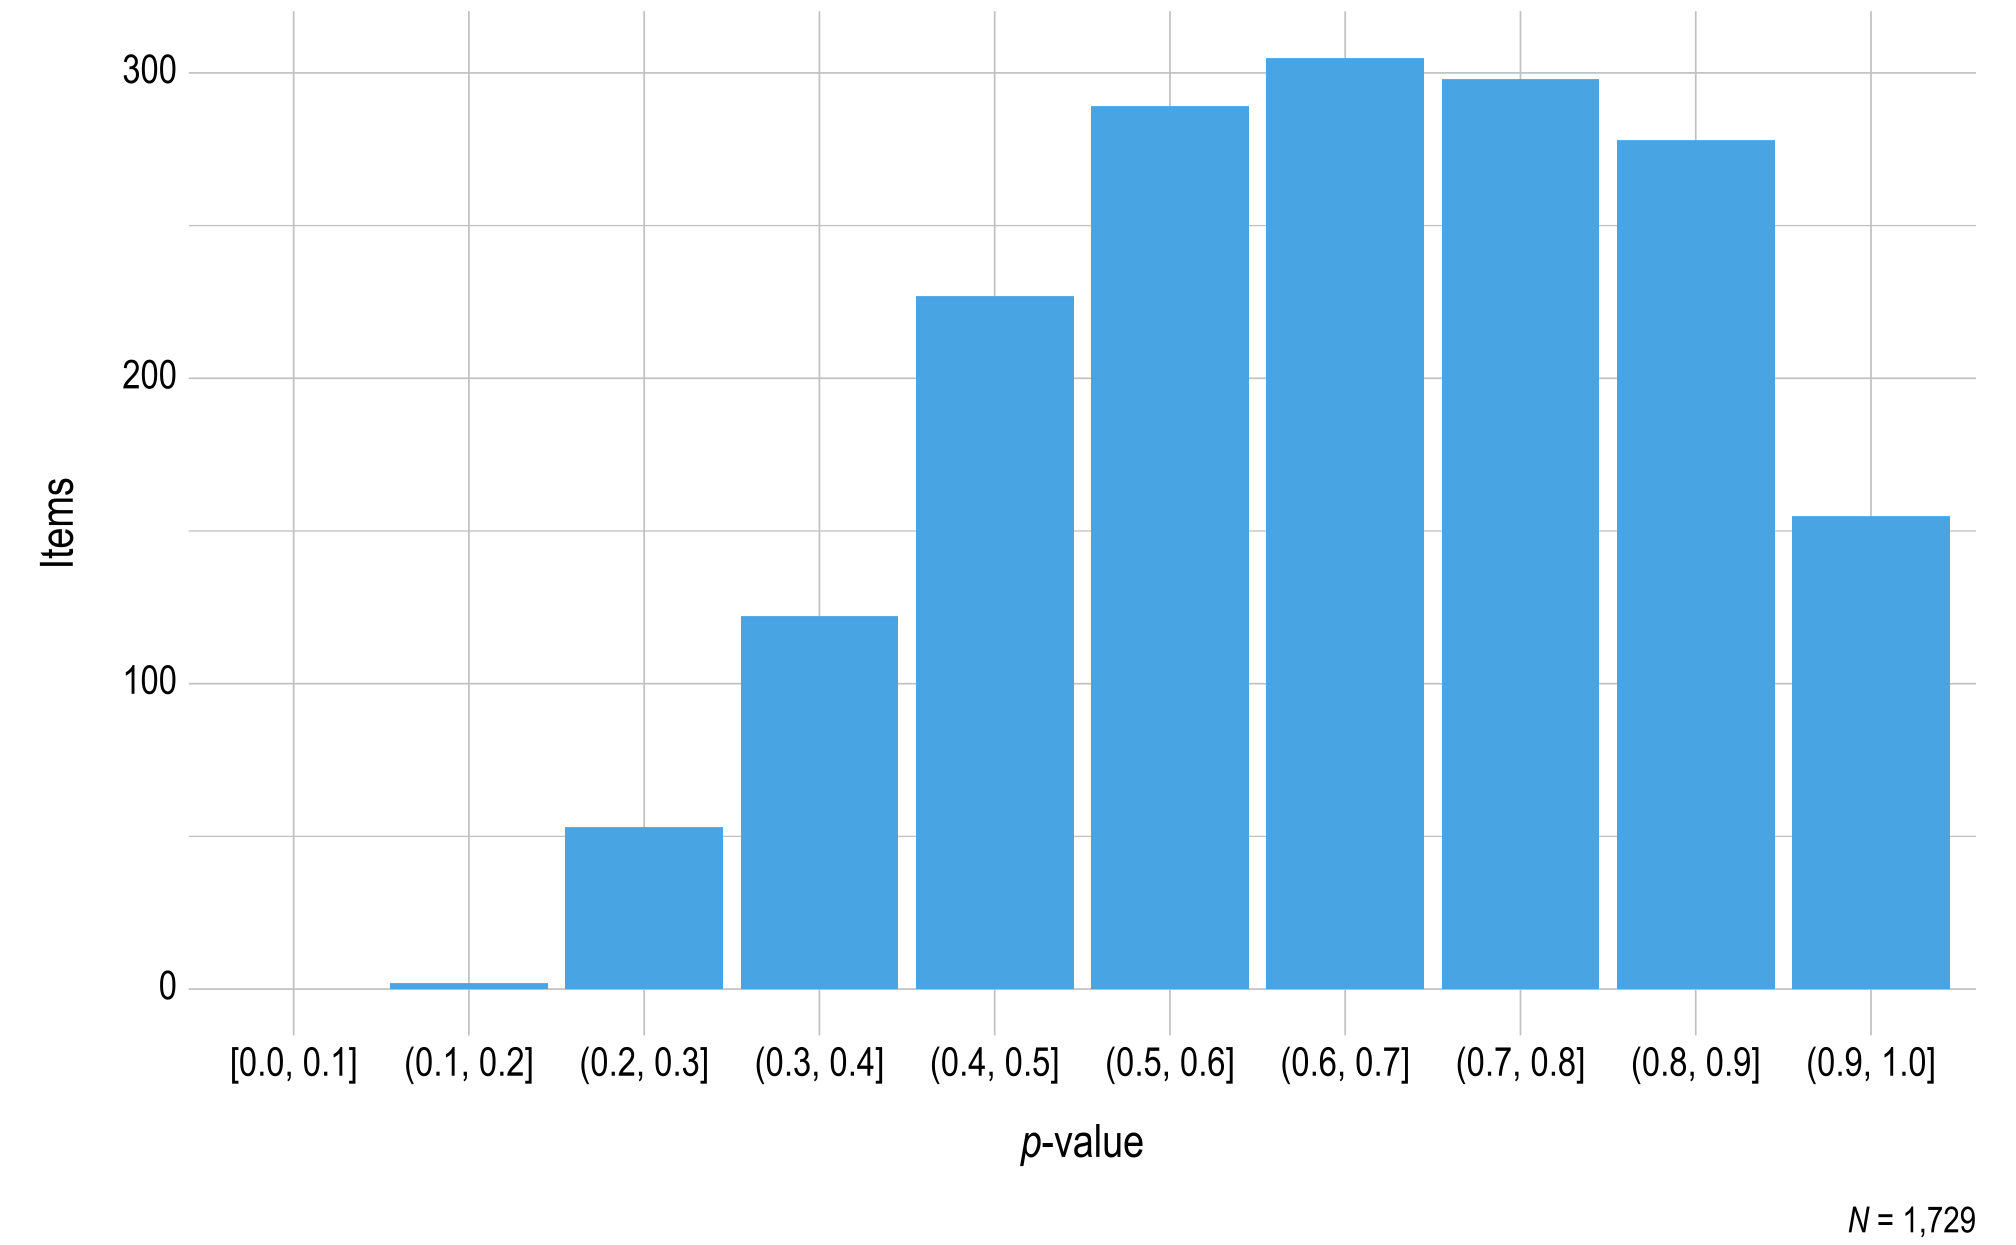 A histogram displaying p-value on the x-axis and the number of English language arts operational items on the y-axis.